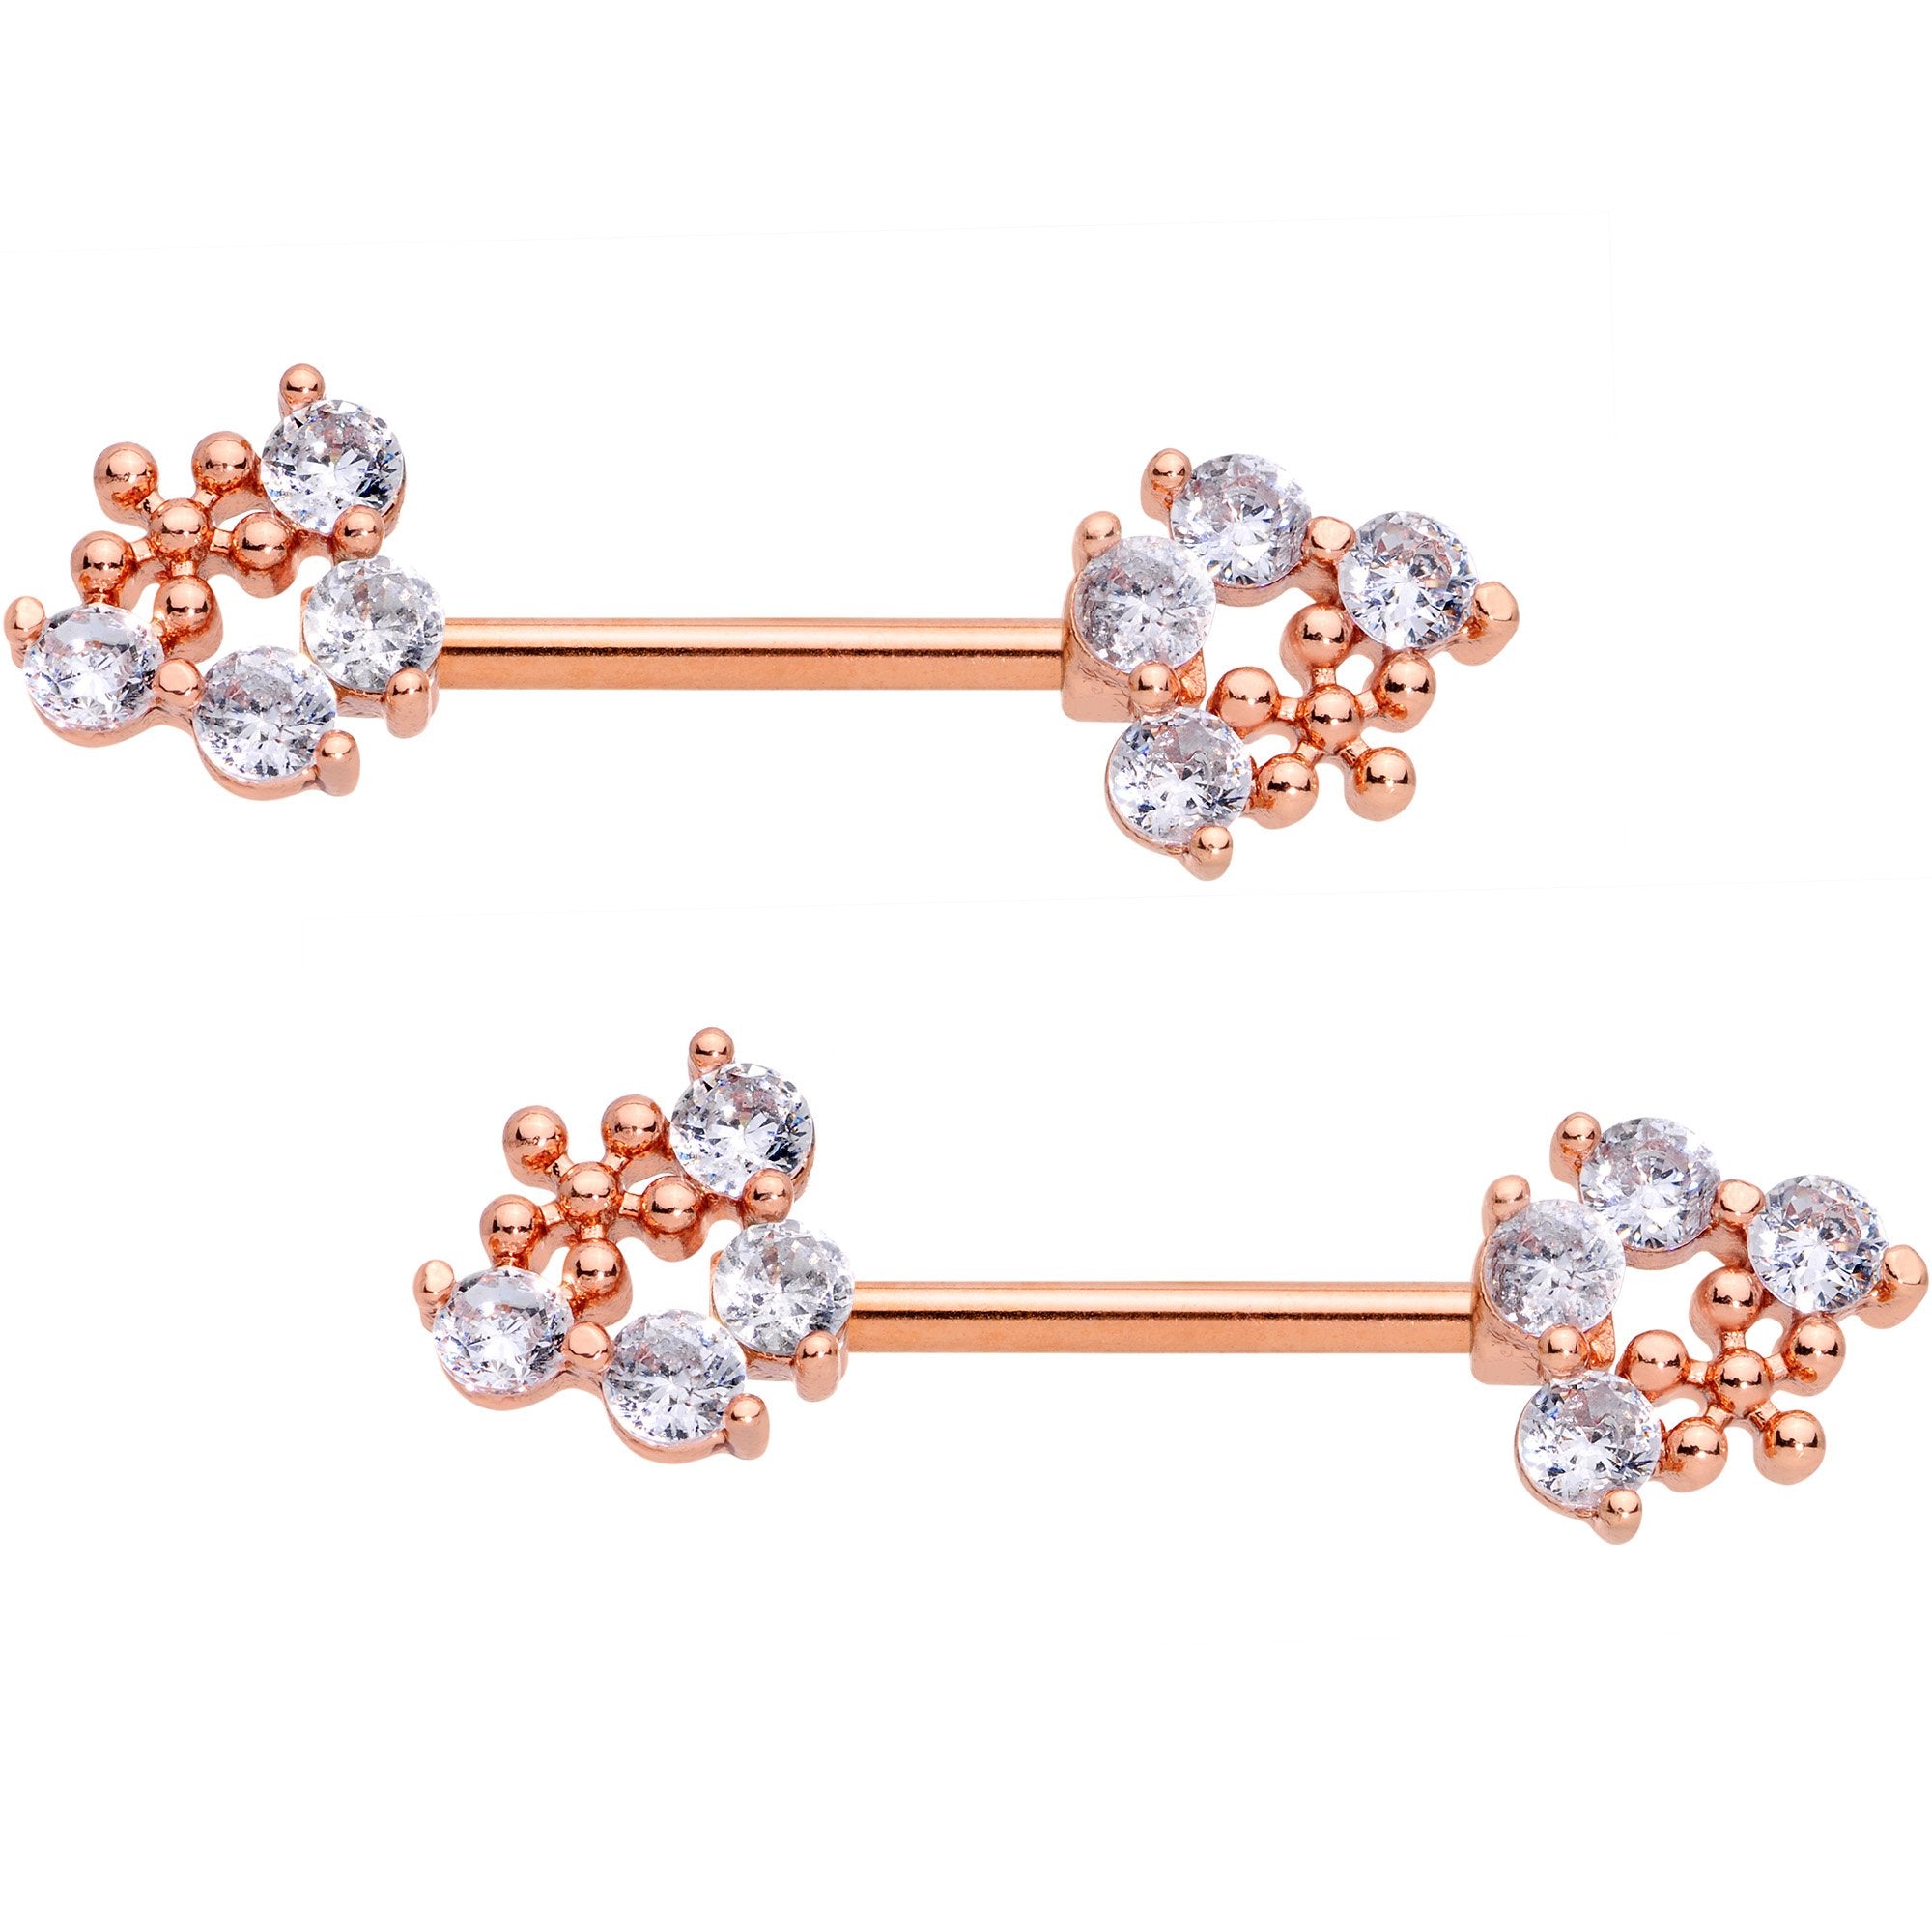 Clear Gem Rose Gold Tone Anodized Cluster Barbell Nipple Ring Set